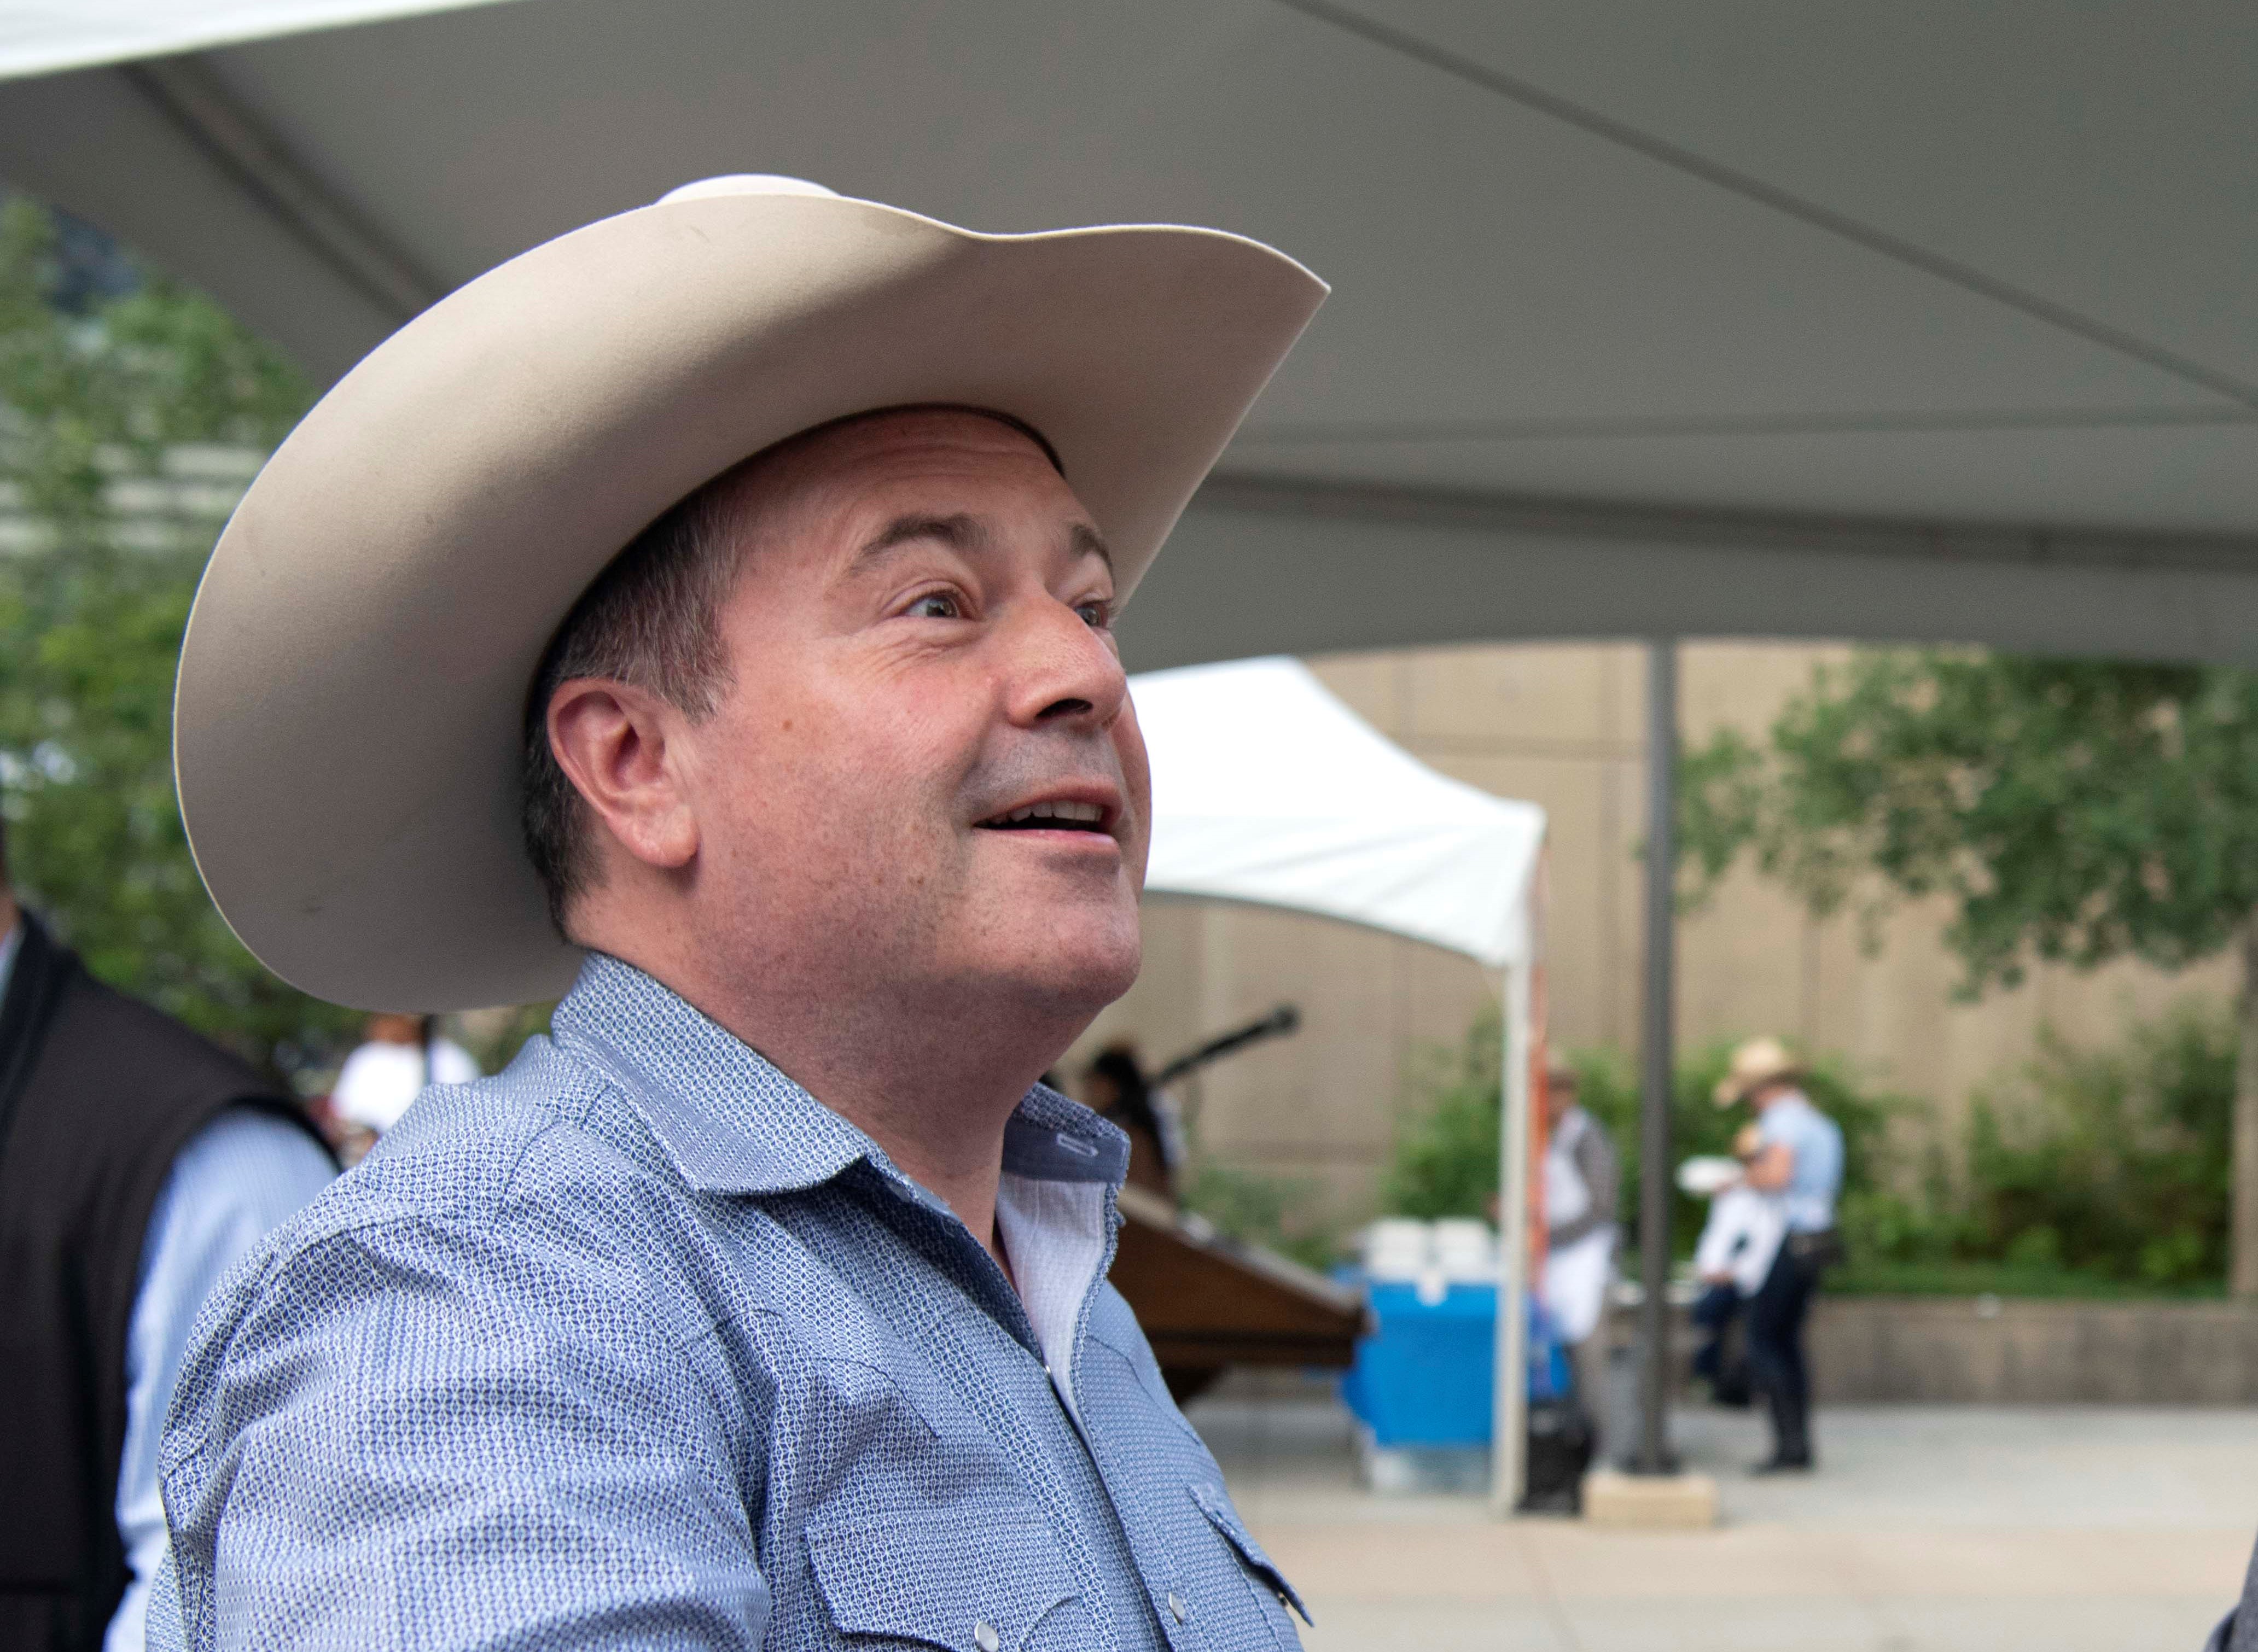 Seen from the side, a round-faced middle-aged man (Jason Kenney) wearing a white cowboy hat, smiles.